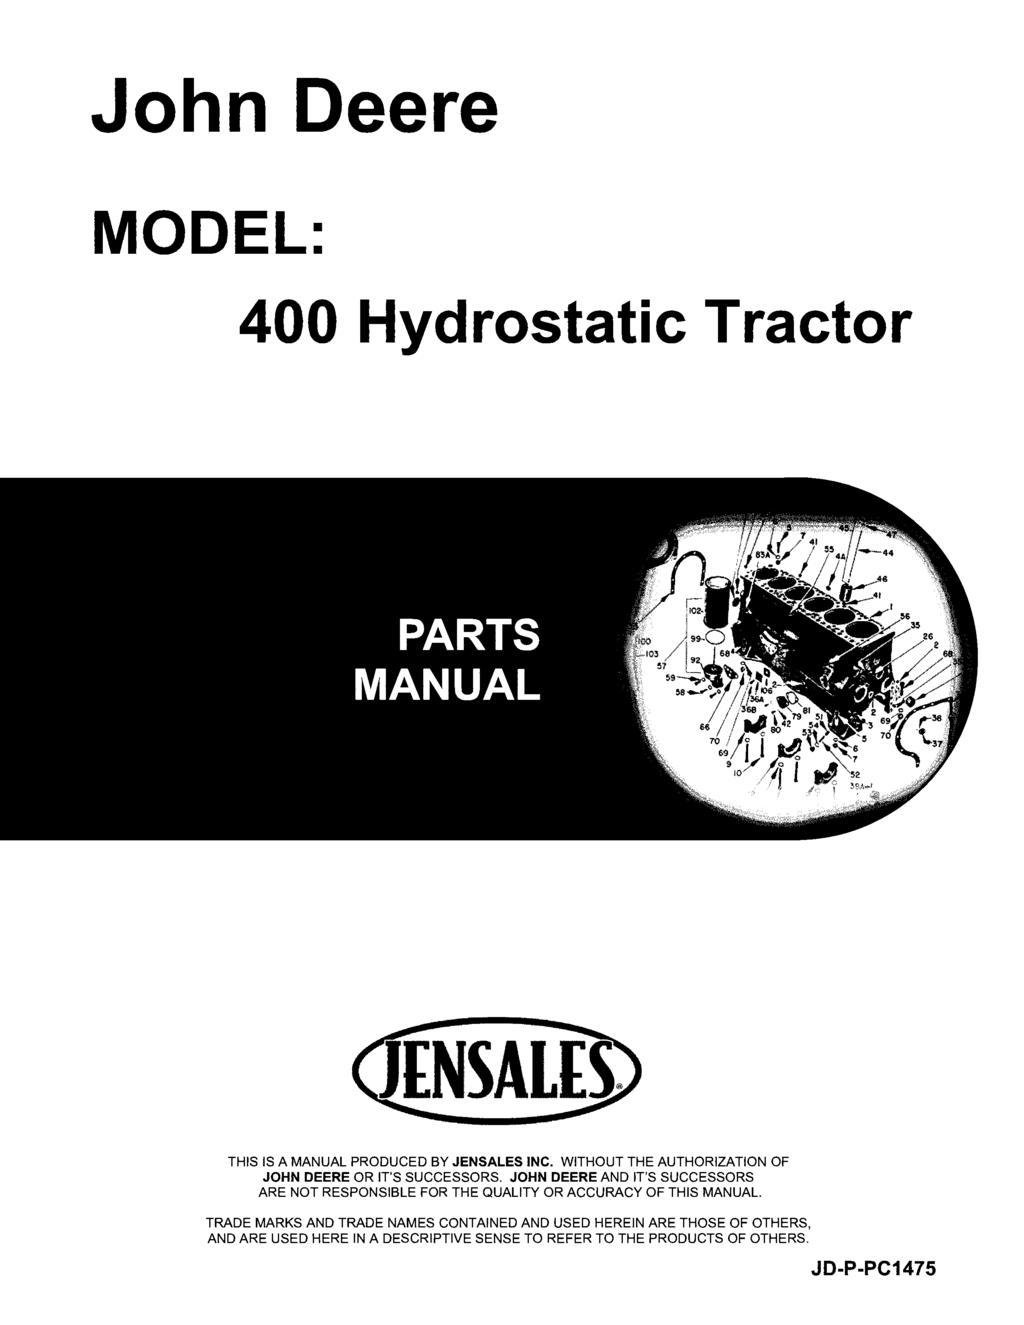 John Deere MODEL: 400 Hydrostatic Tractor THIS IS A MANUAL PRODUCED BY JENSALES INC. WITHOUT THE AUTHORIZATION OF JOHN DEERE OR IT'S SUCCESSORS.